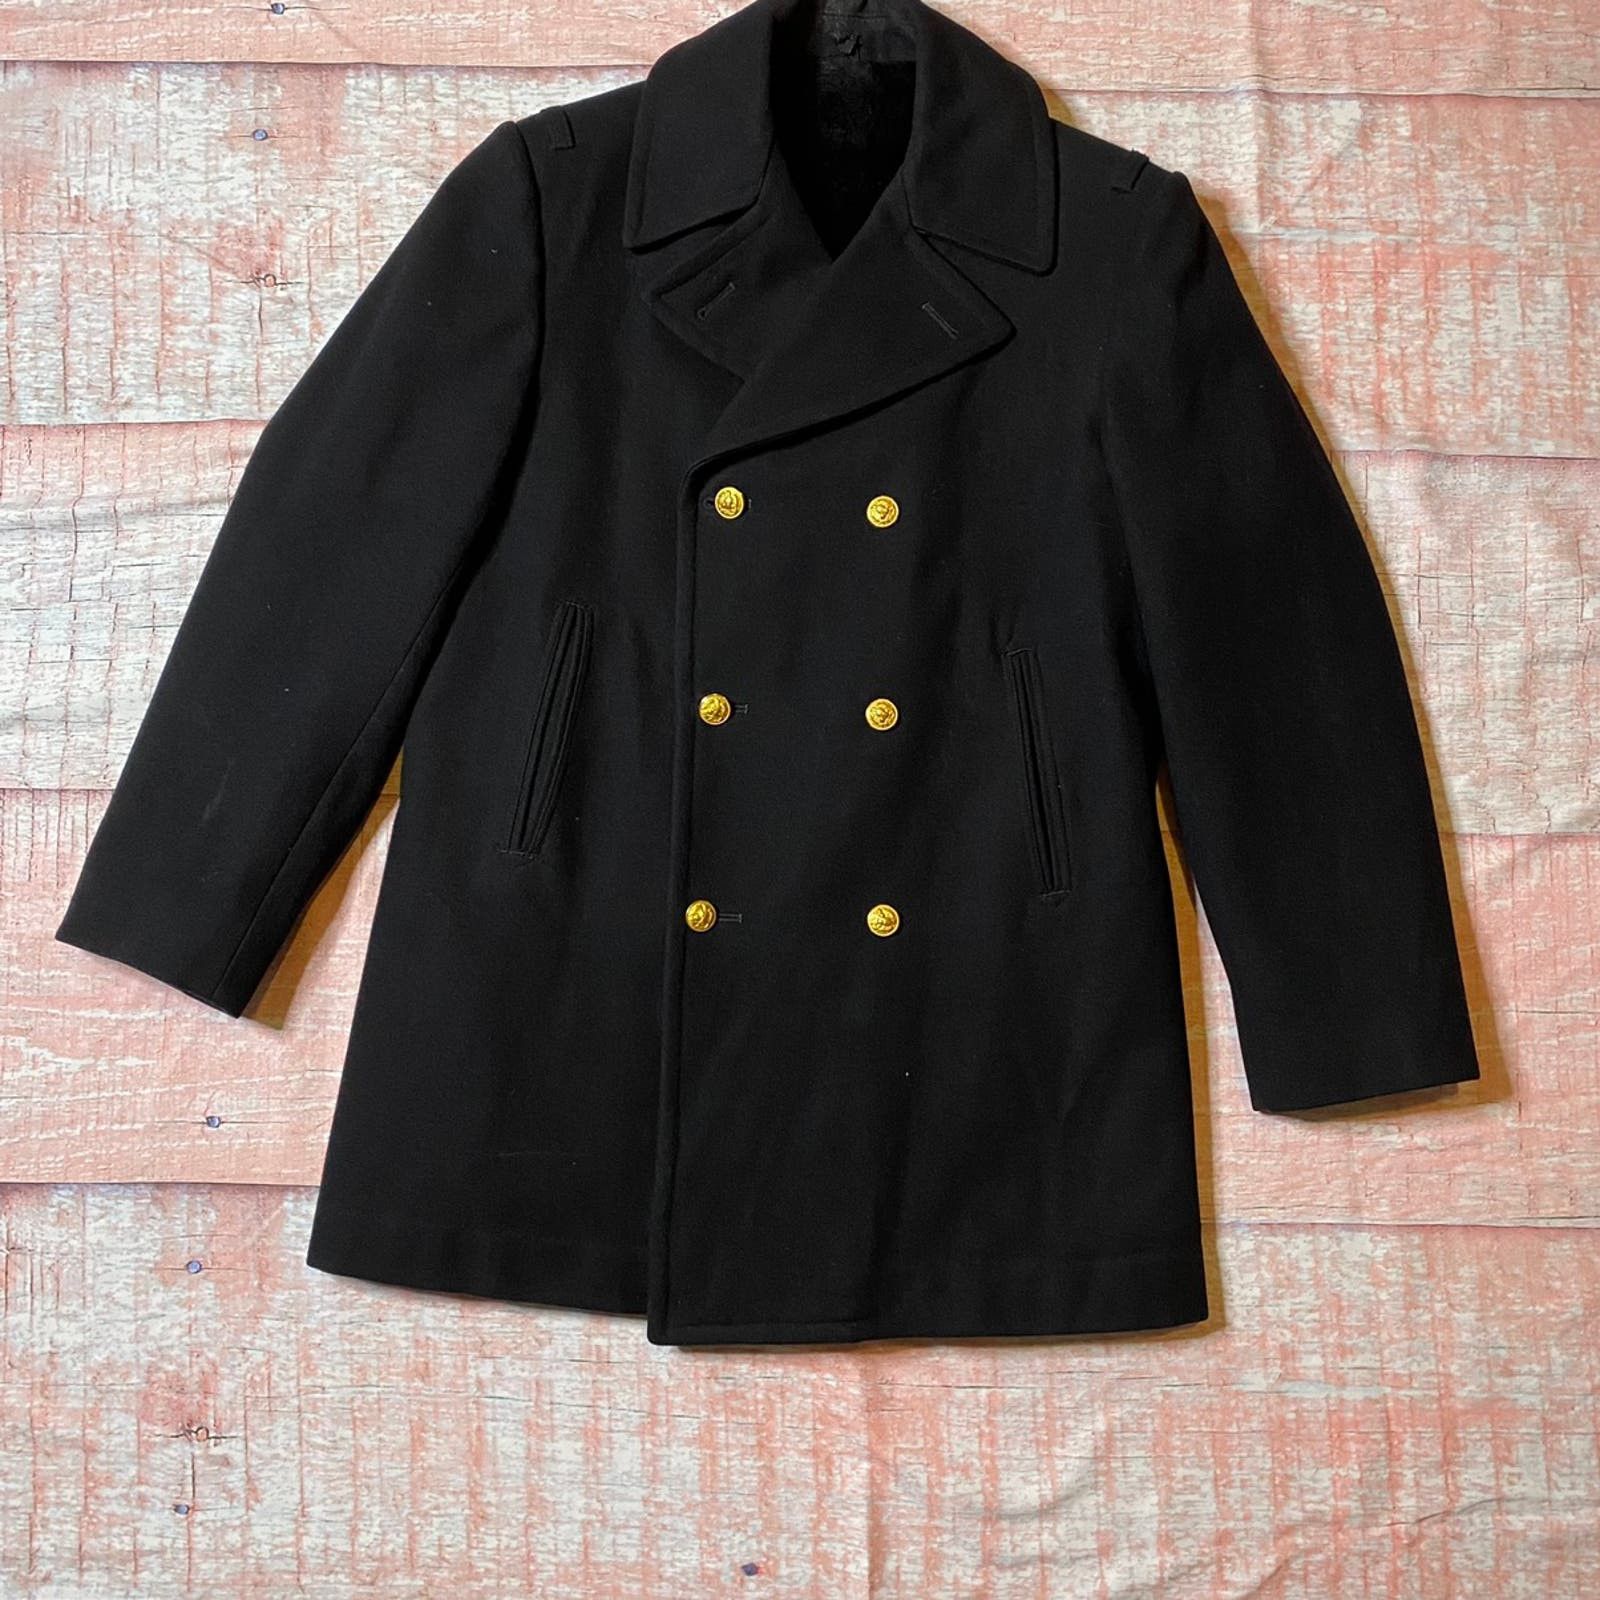 Other Neptune Garment Co Black Wool Military Pea Coat Size Small Size US S / EU 44-46 / 1 - 2 Preview